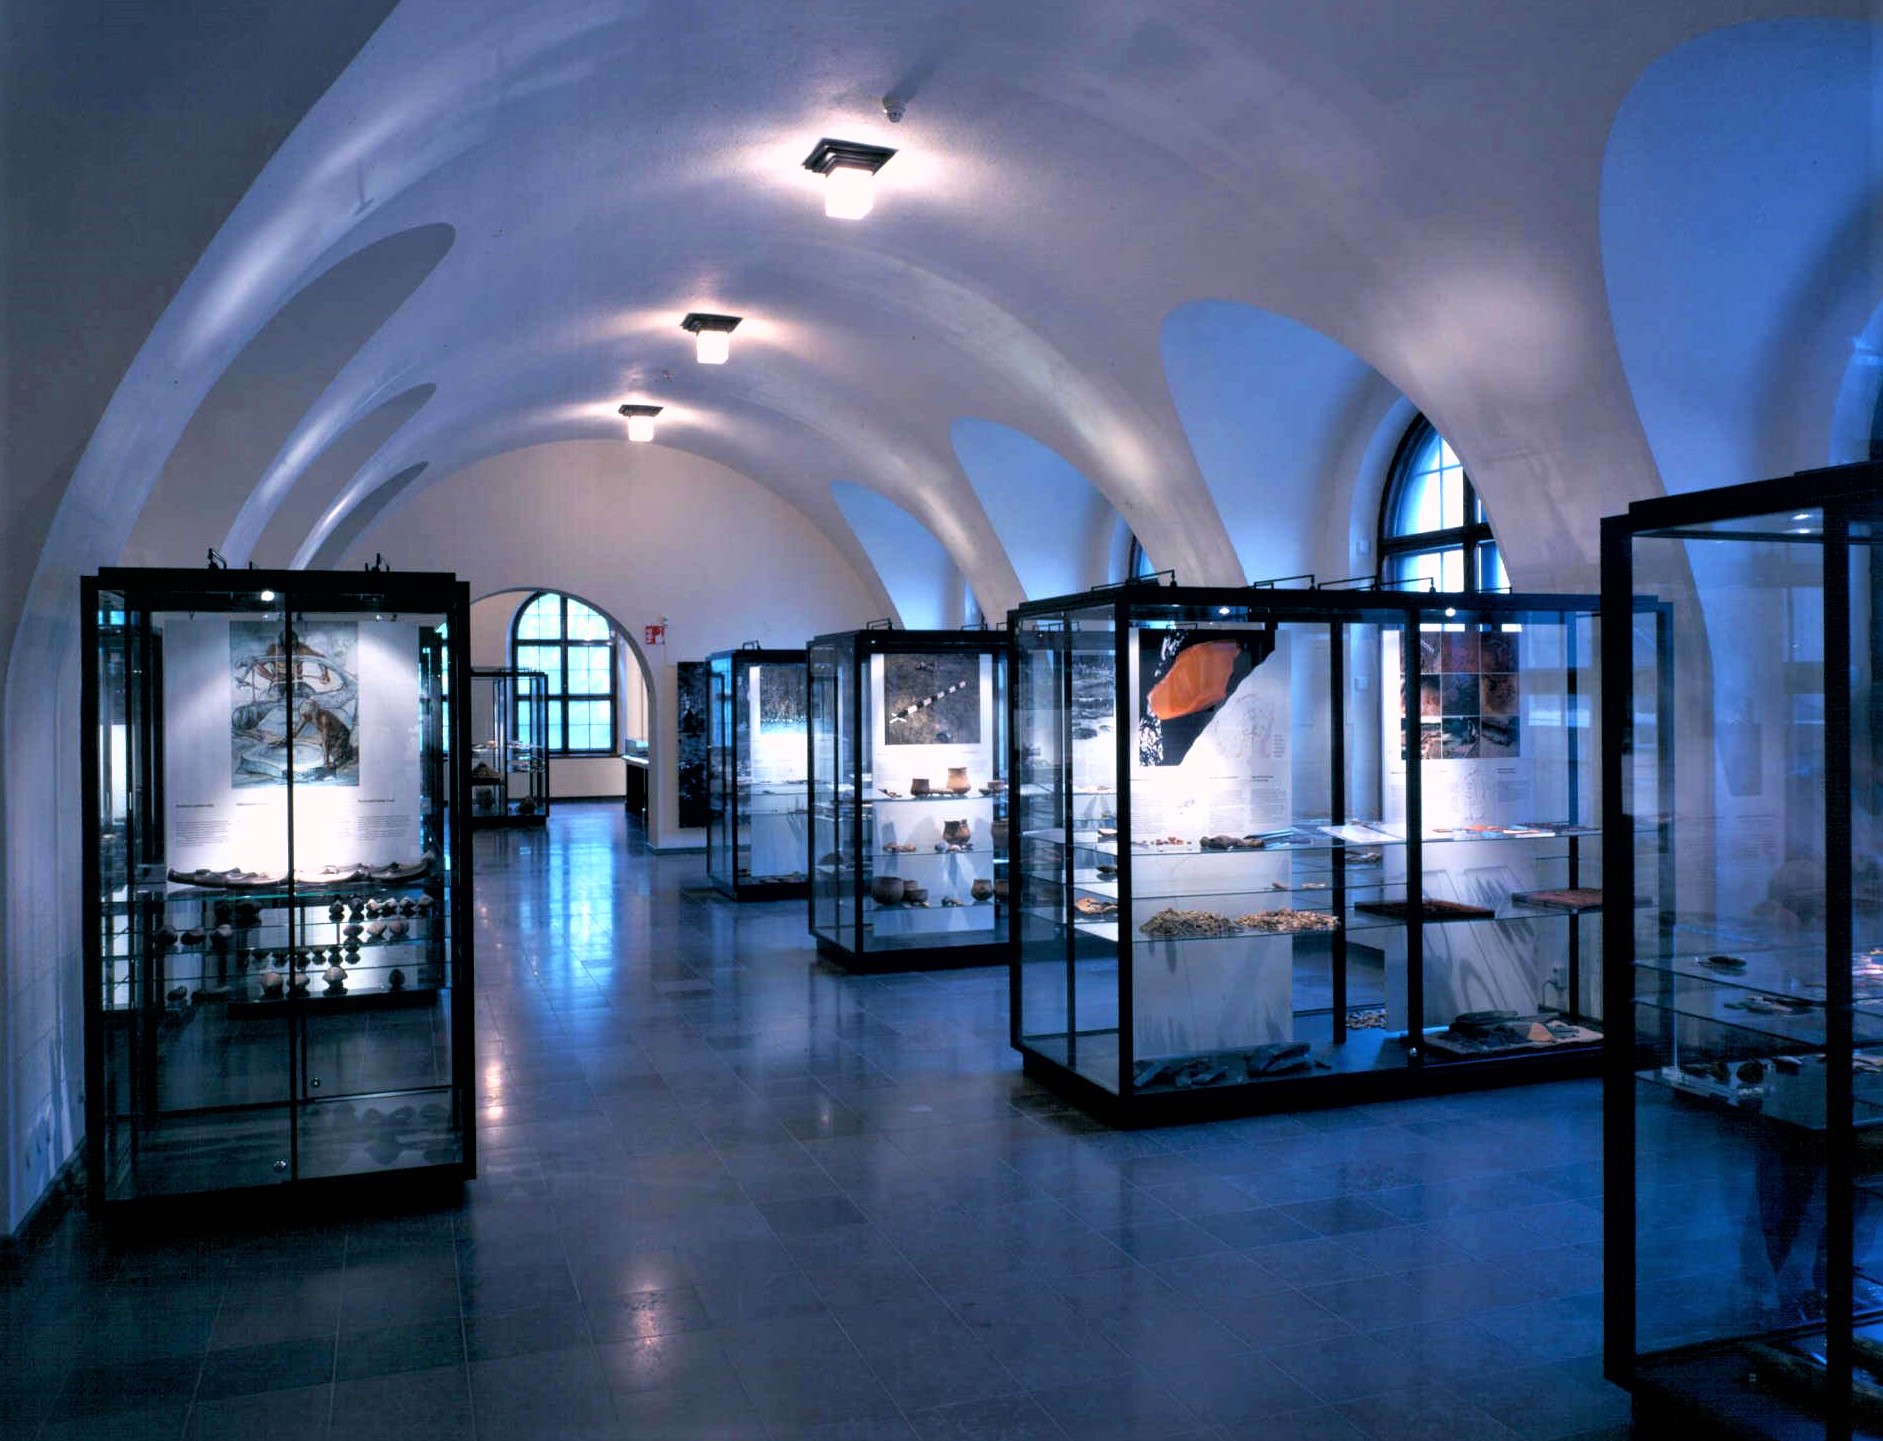 The National Museum of Finland